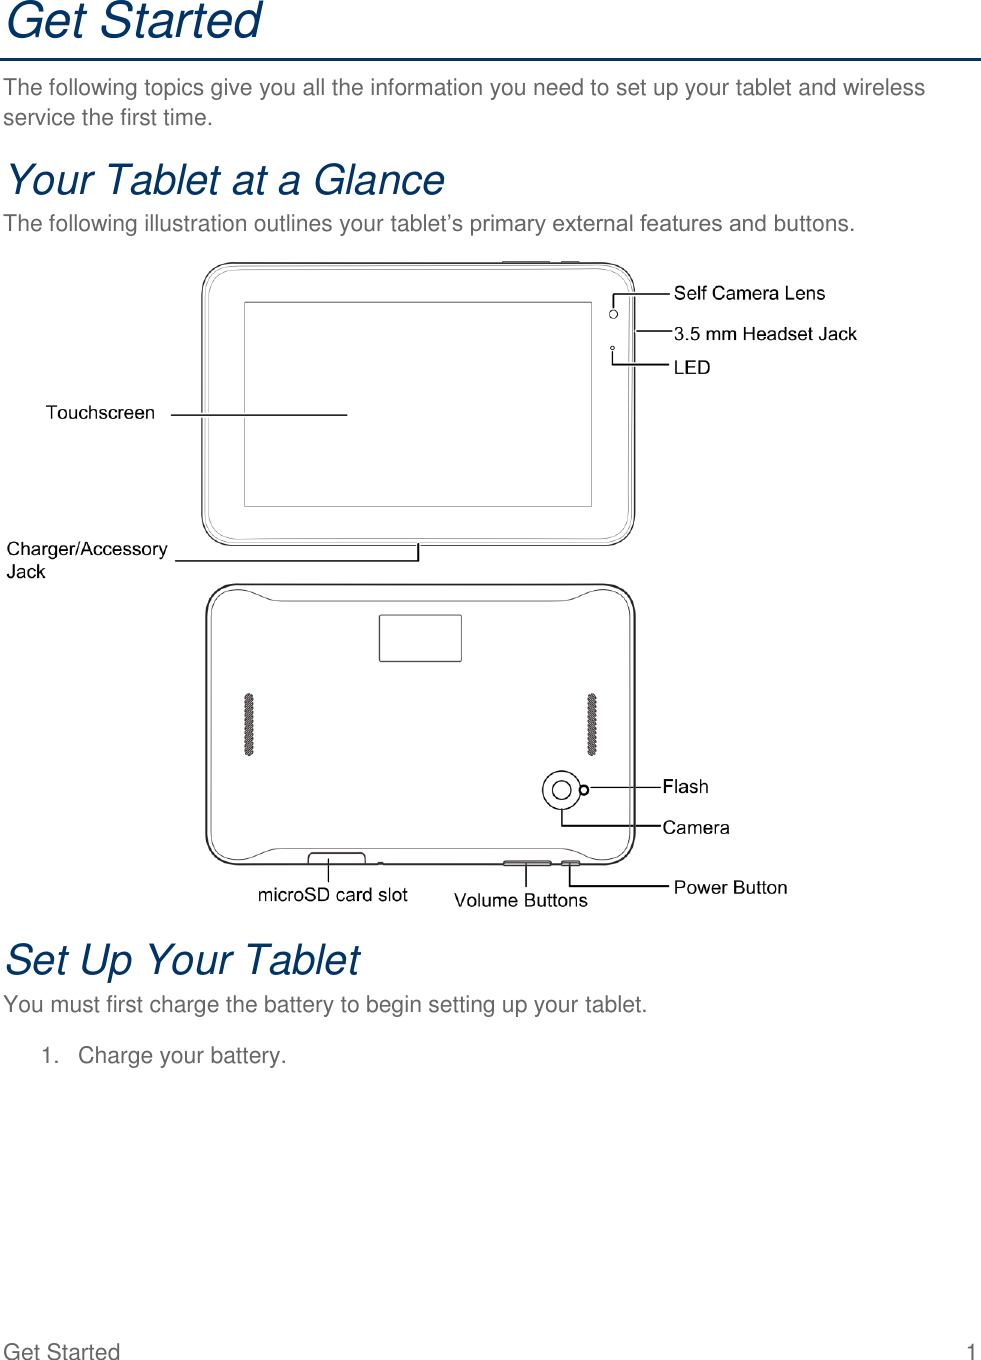  Get Started  1 Get Started The following topics give you all the information you need to set up your tablet and wireless service the first time. Your Tablet at a Glance The following illustration outlines your tablet’s primary external features and buttons.  Set Up Your Tablet You must first charge the battery to begin setting up your tablet. 1.  Charge your battery. 